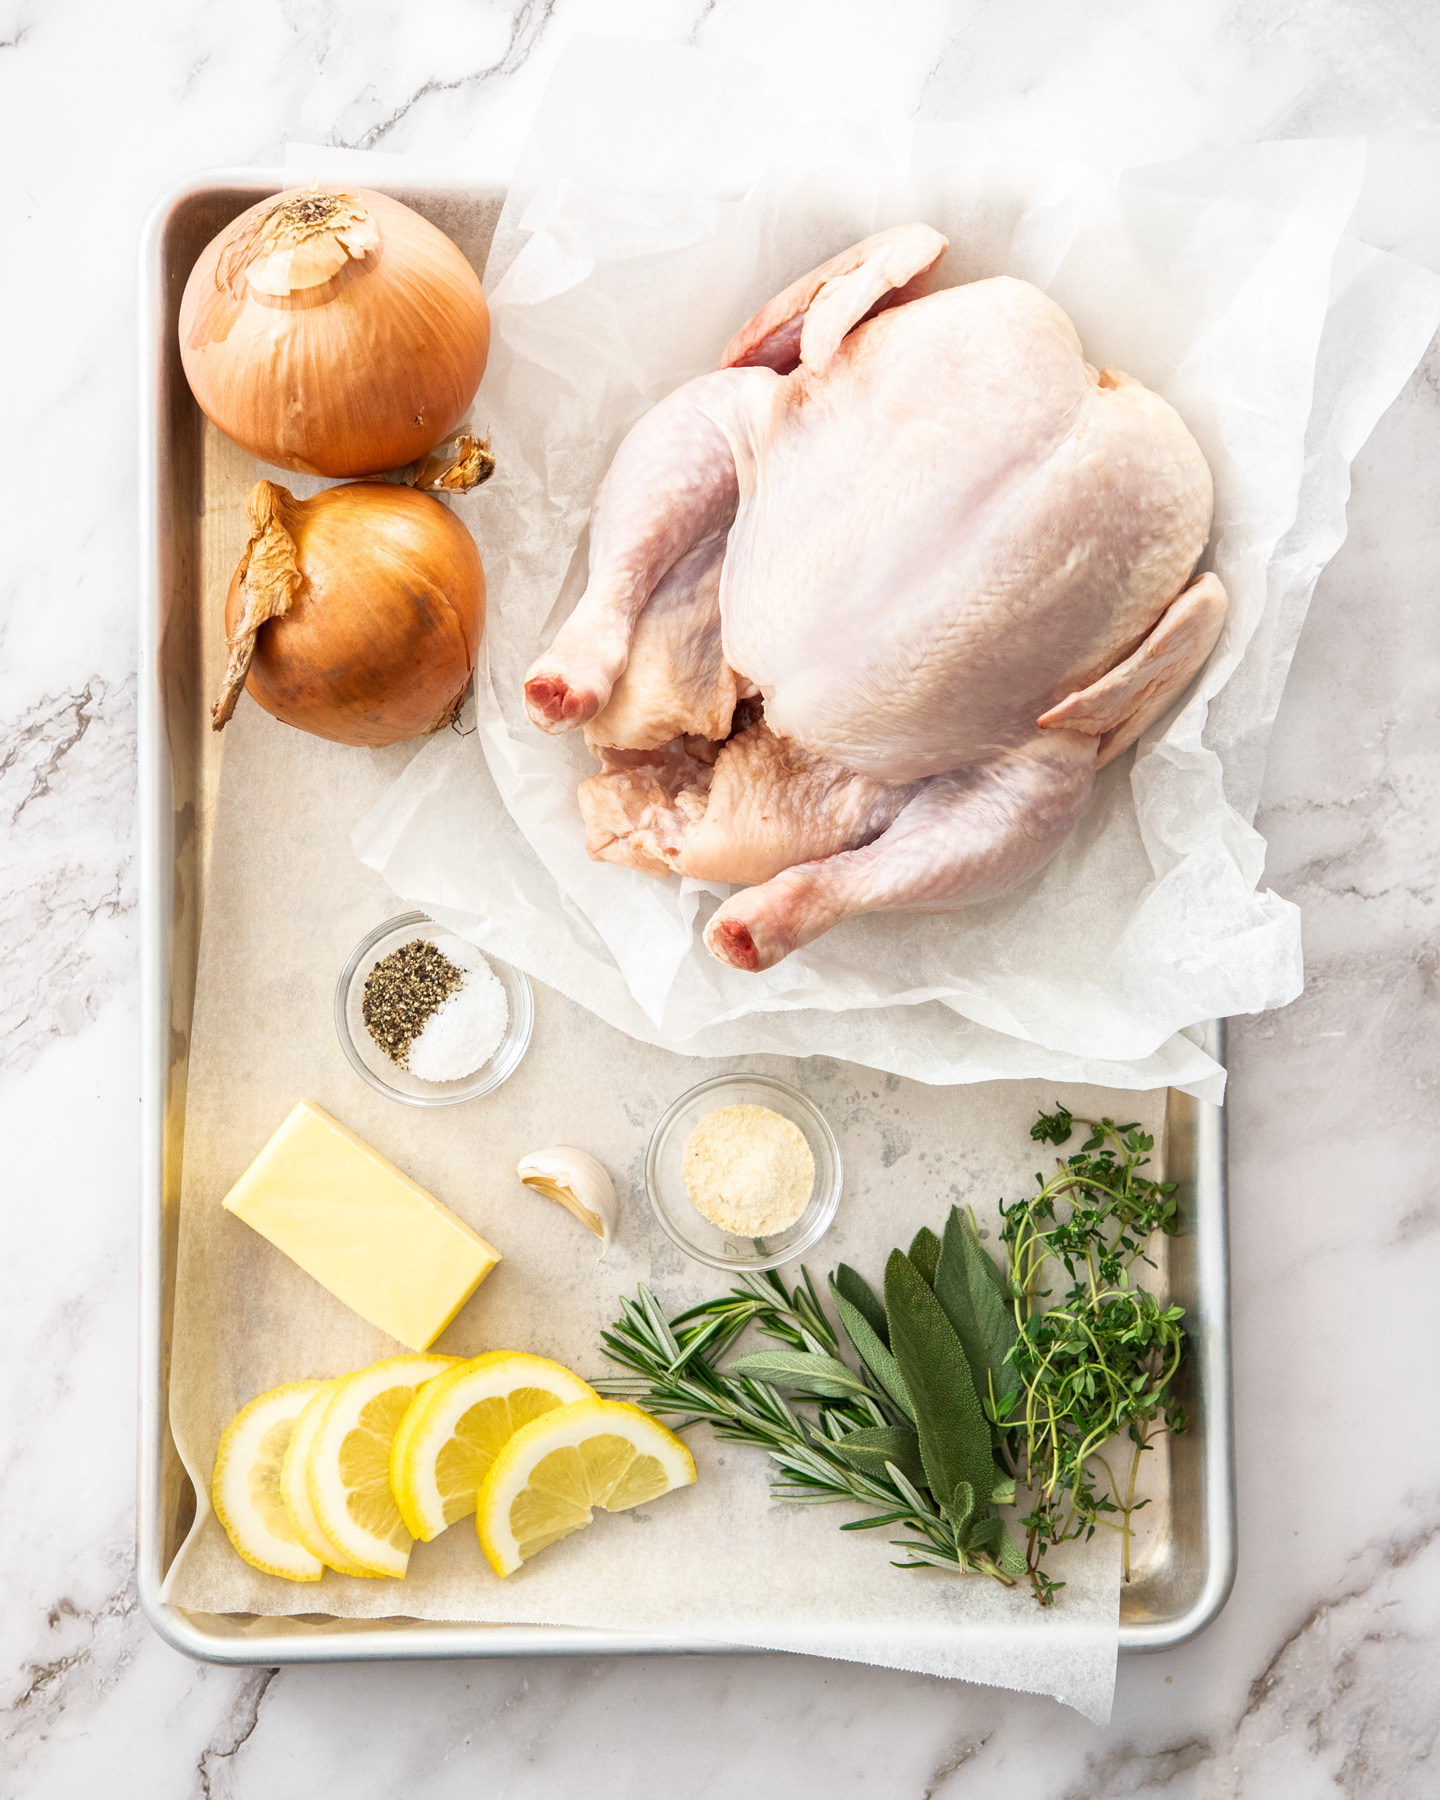 Ingredients for herb roasted chicken on a baking tray.